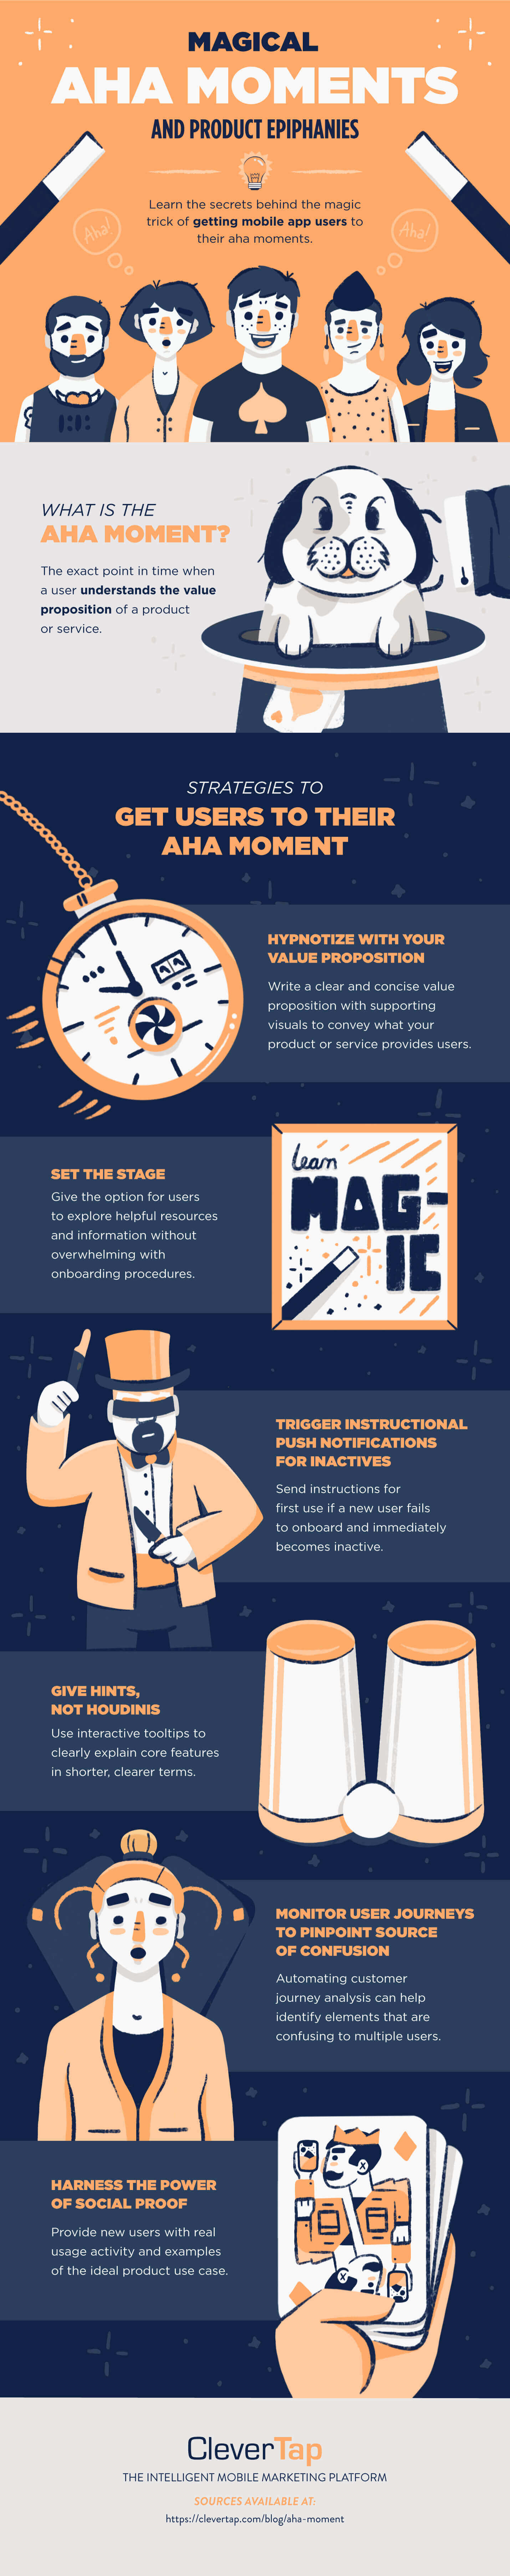 aha moment infographic tips featuring magician theme with hypnotizing stopwatch, blindfolded magician throwing knives, card trick, and group of customers experiencing their eureka aha moment